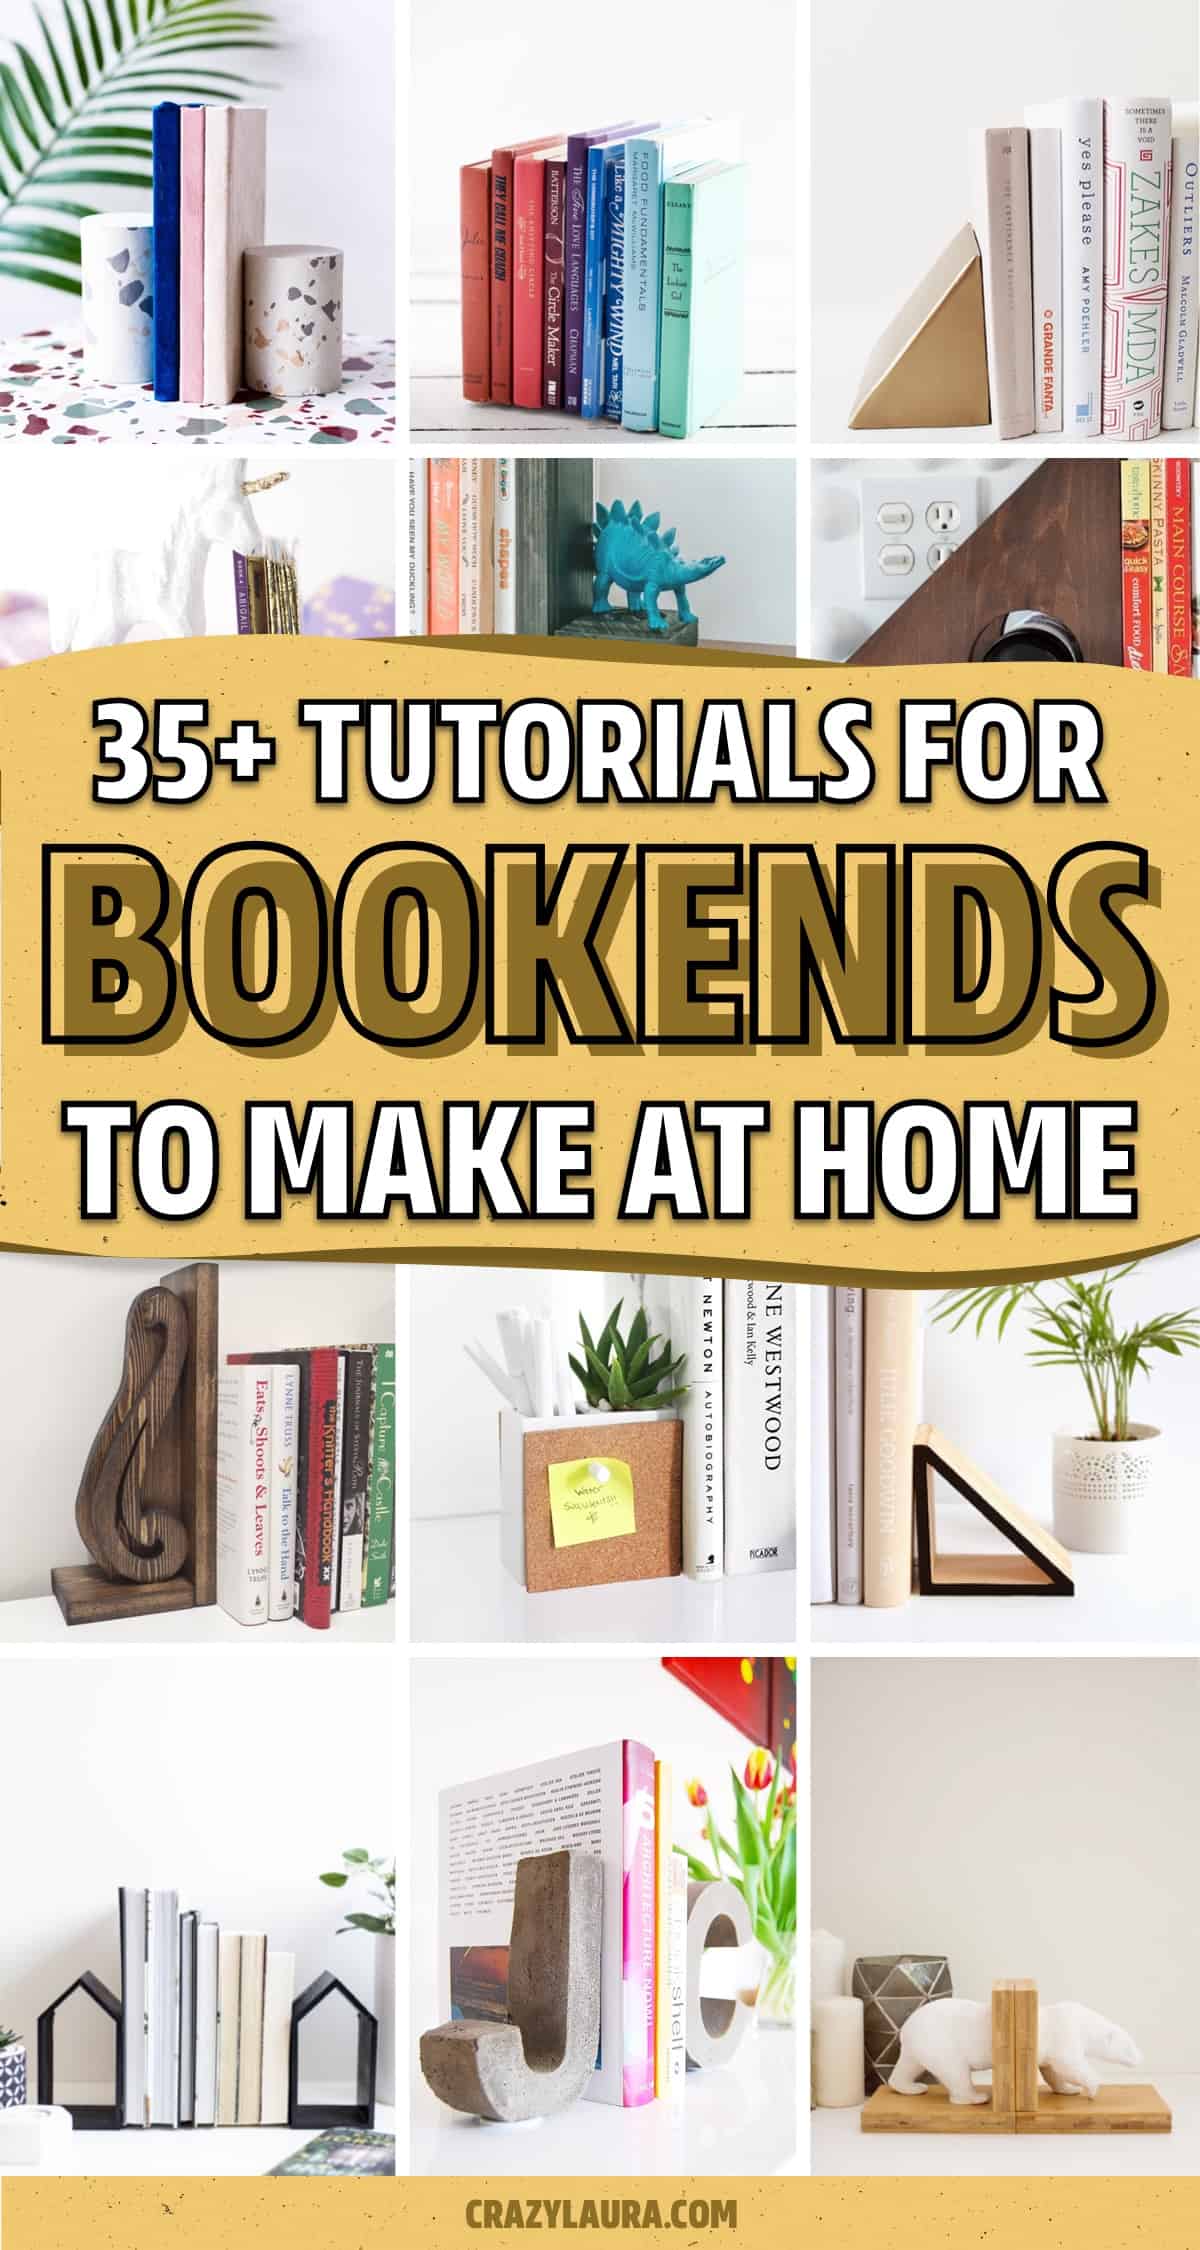 easy ideas for homemade bookend